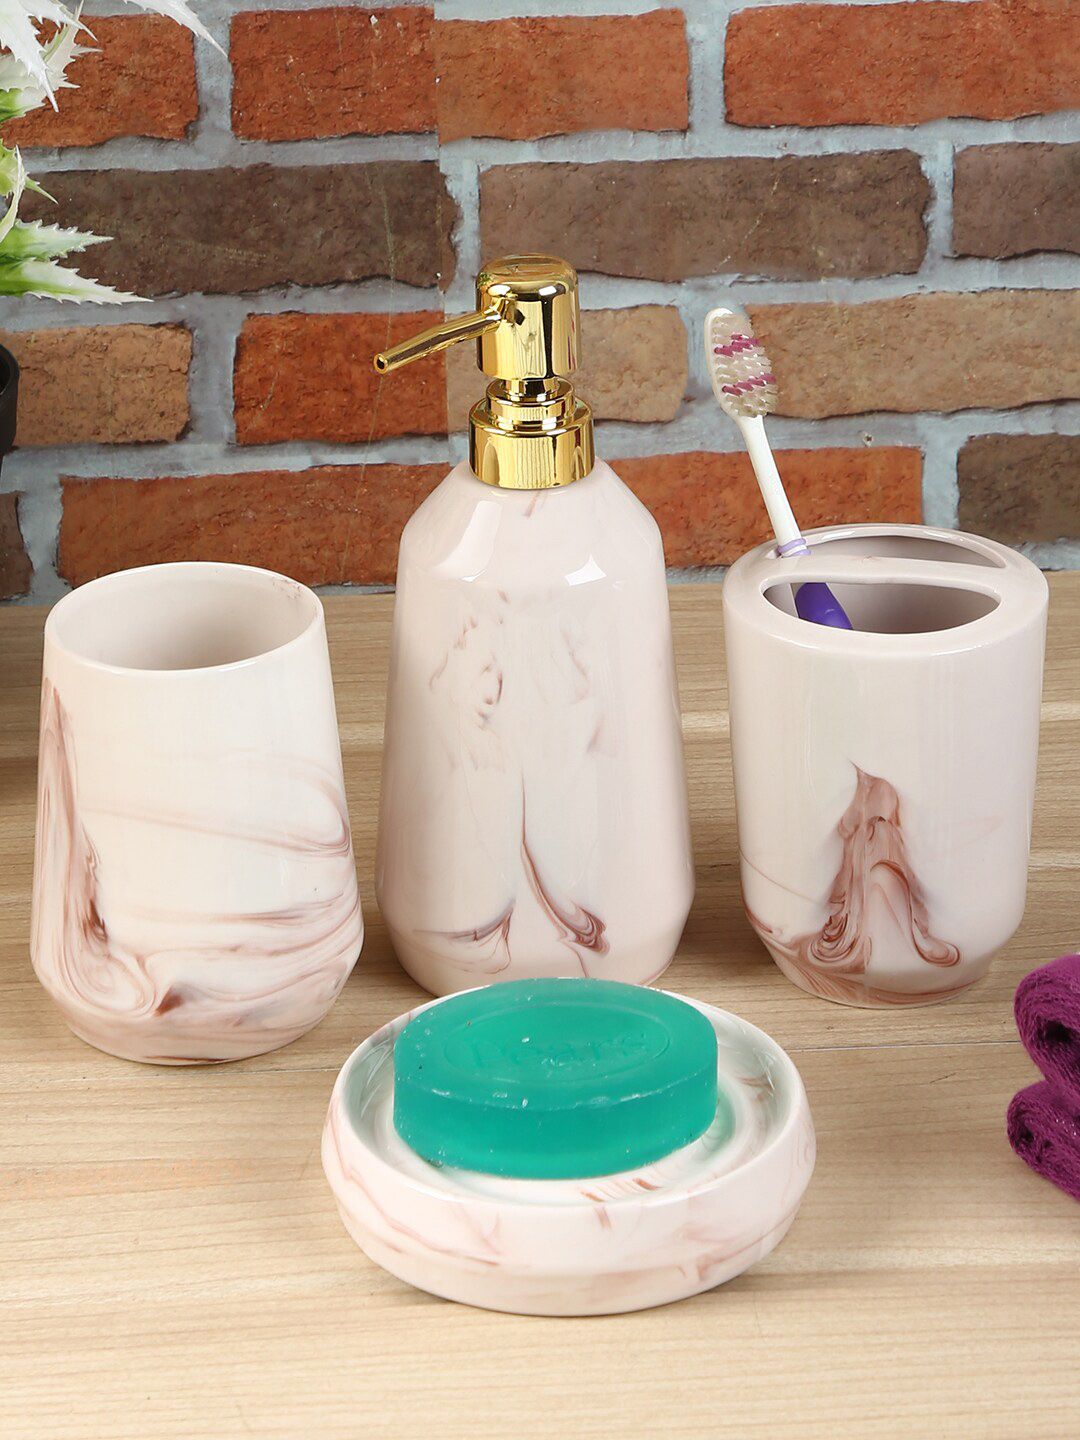 House Of Accessories Set Of 4 Pink & White Solid Ceramic Bathroom Accessories Price in India